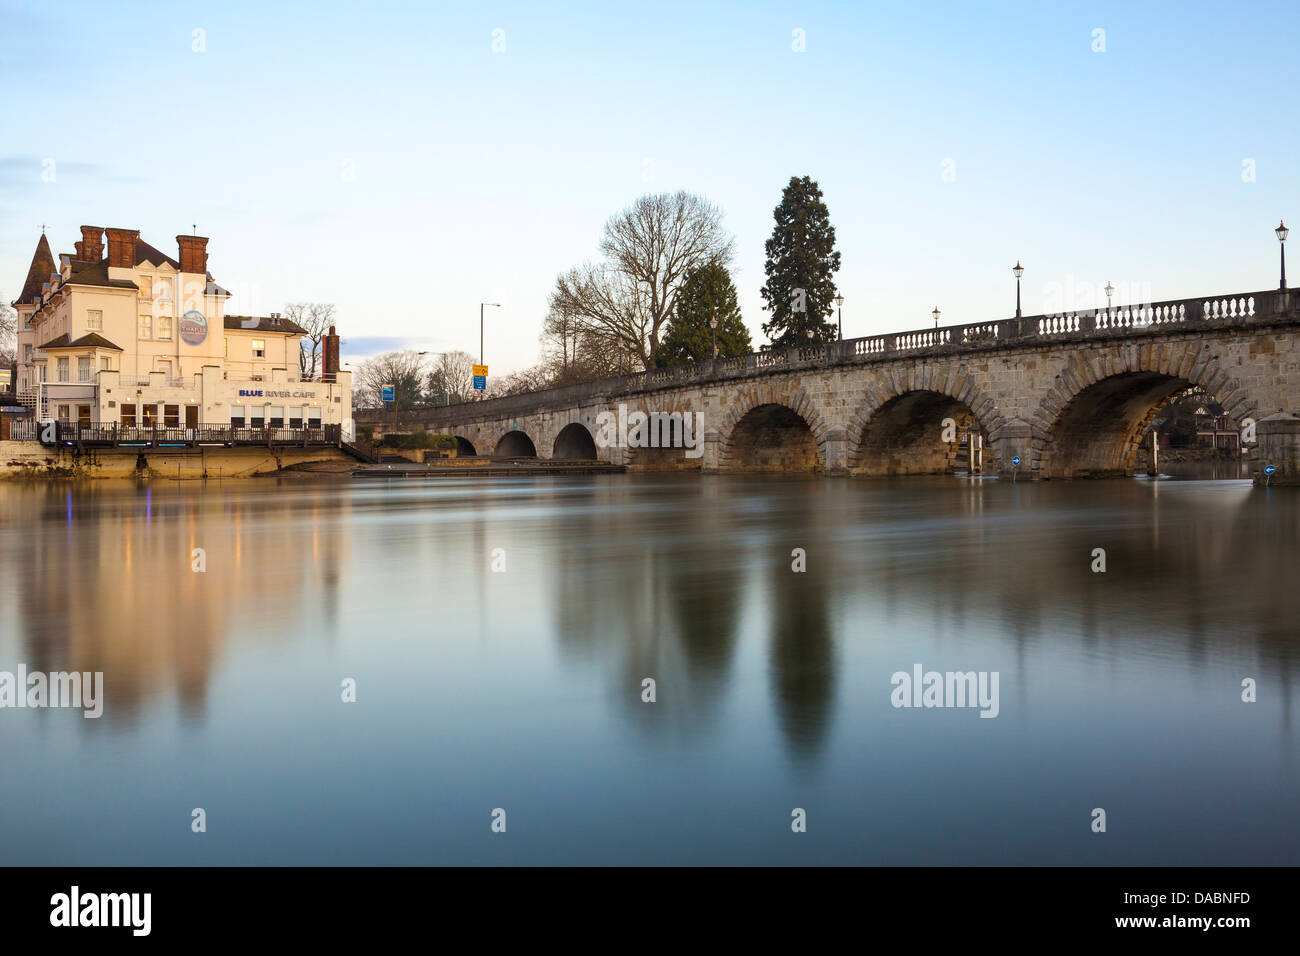 The Blue River Cafe and Bridge on the River Thames, Maidenhead, Berkshire, England, United Kingdom, Europe Stock Photo